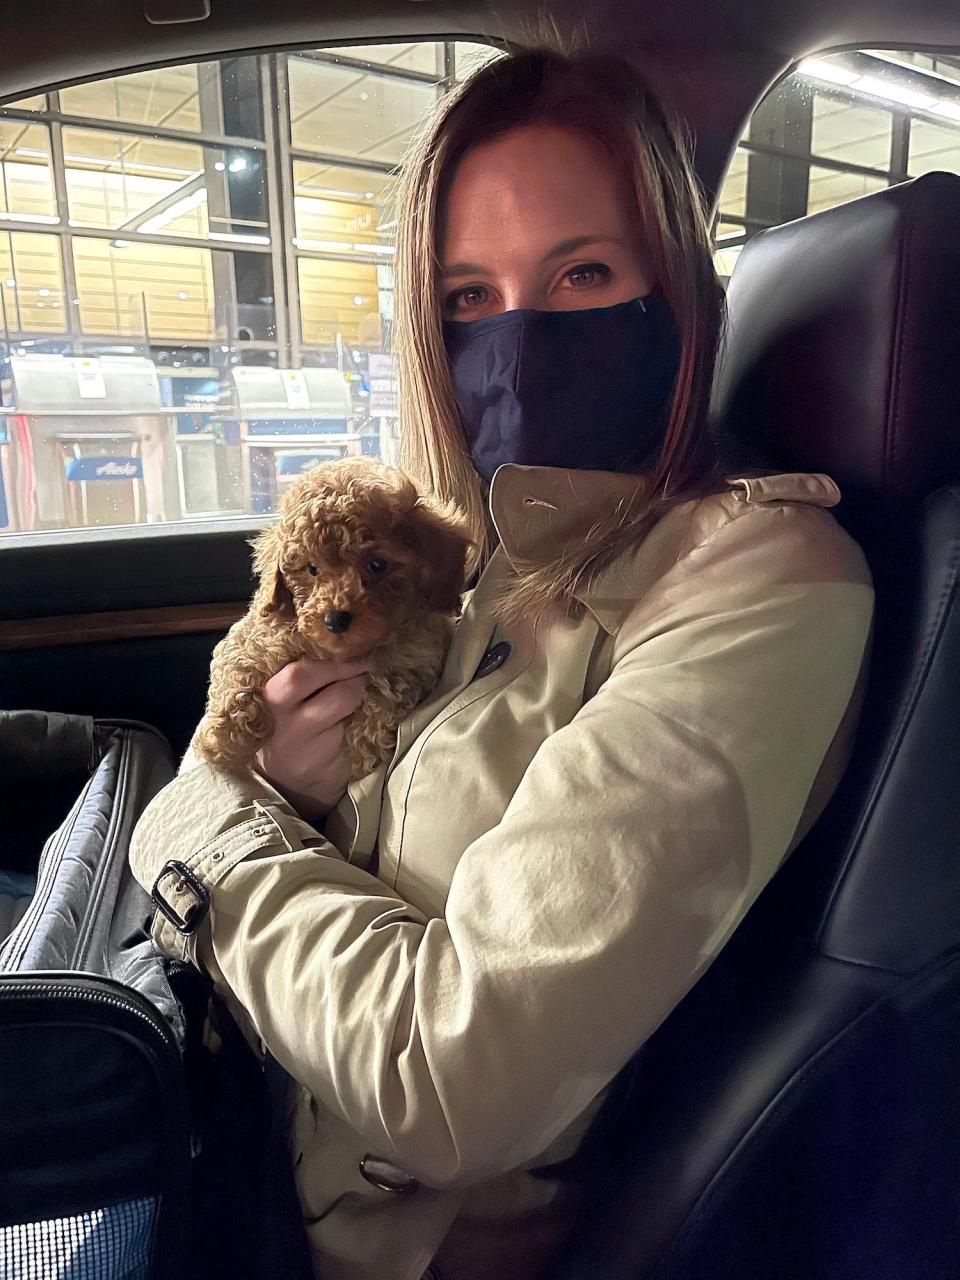 These are photos I took from my first flight as an OFFICIAL flight nanny in November 2020. This is Appa Grande - the red toy poodle who belongs to Frankie Grande and Hale Leon.